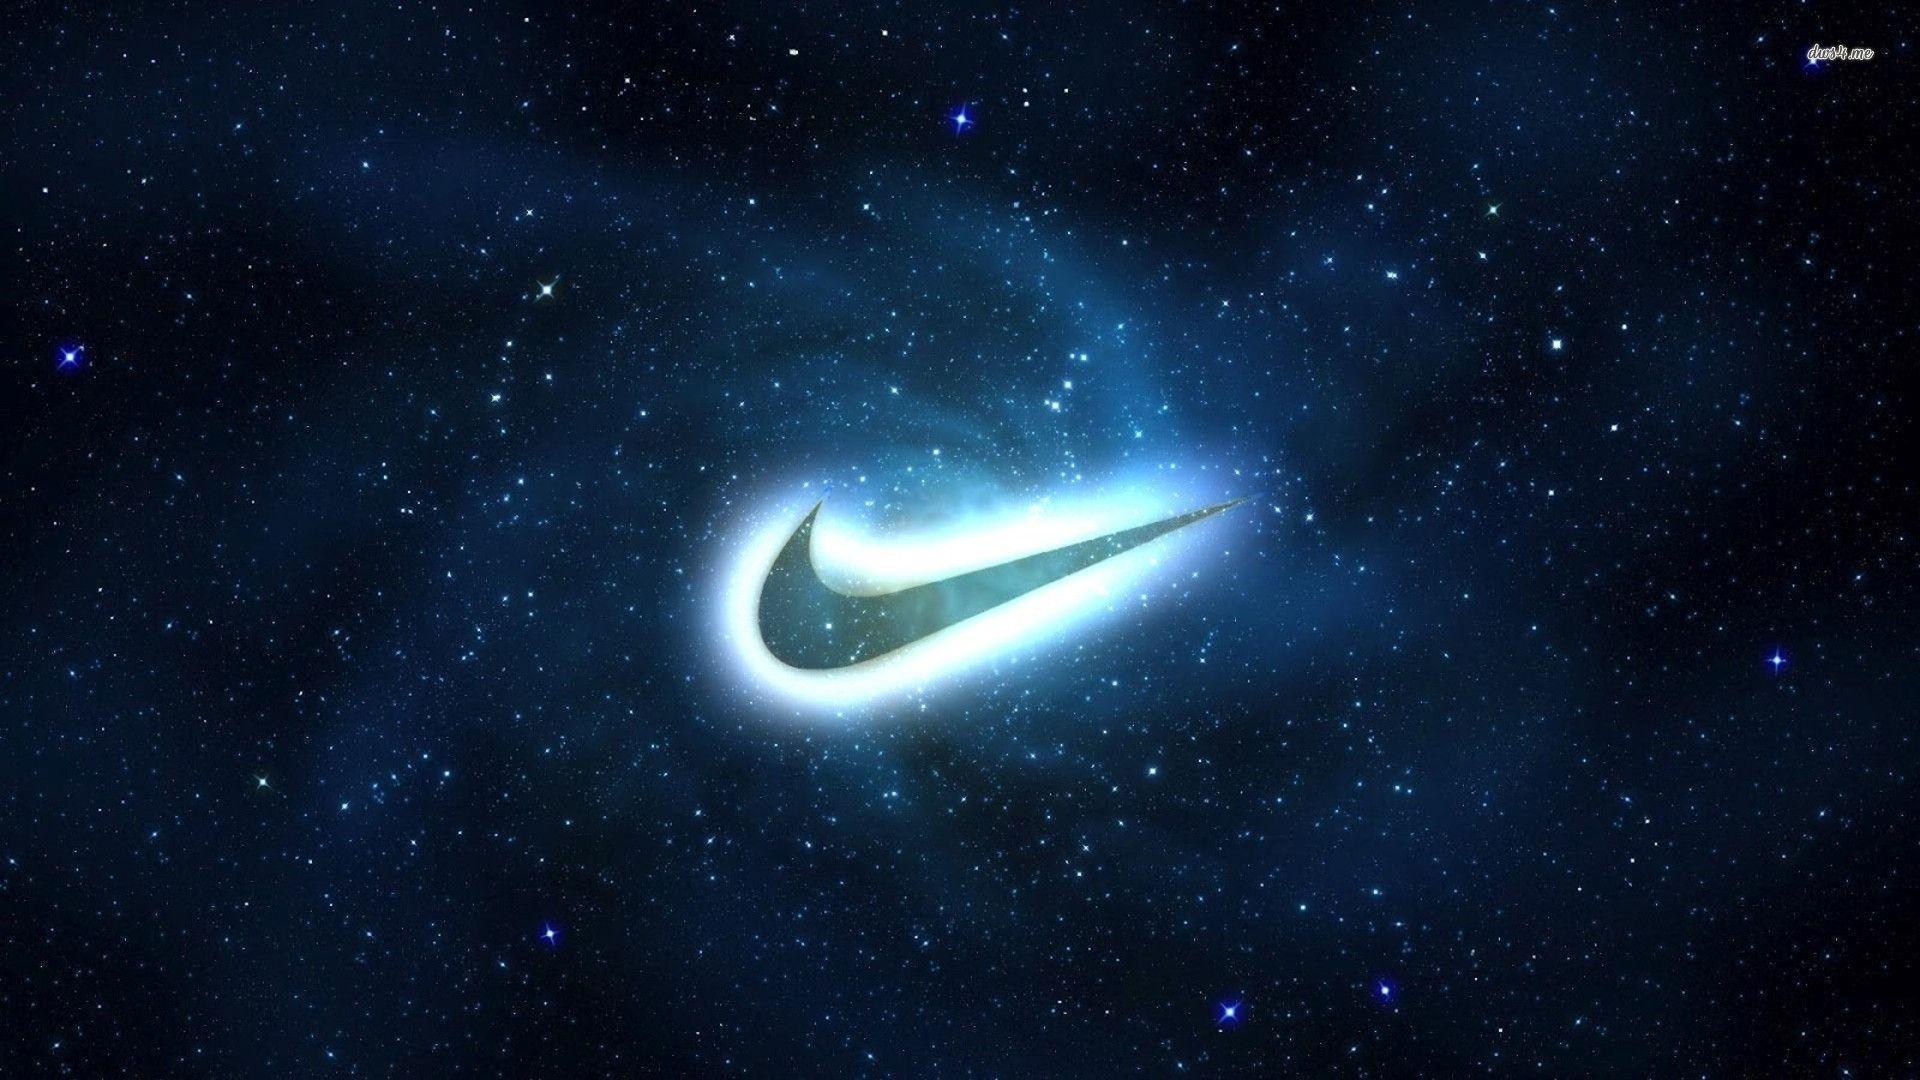 Awesome HDQ Nike Logo Picture (Awesome 48 HQFX Wallpaper)